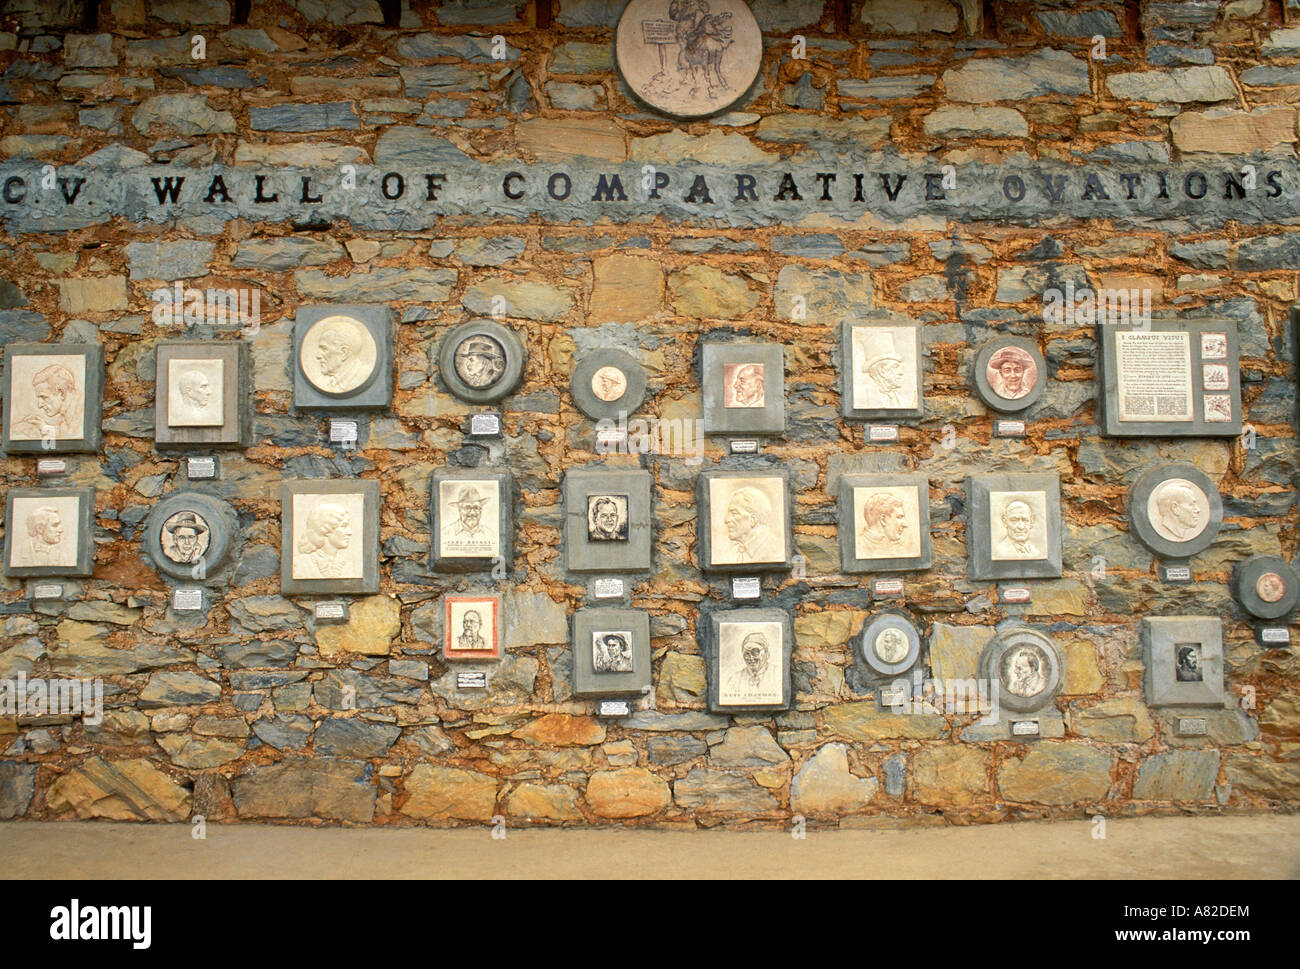 Plaques on the Wall of Comparative Ovations at the Old Timers Museum in Murphys Gold Country Highway 49 California Stock Photo